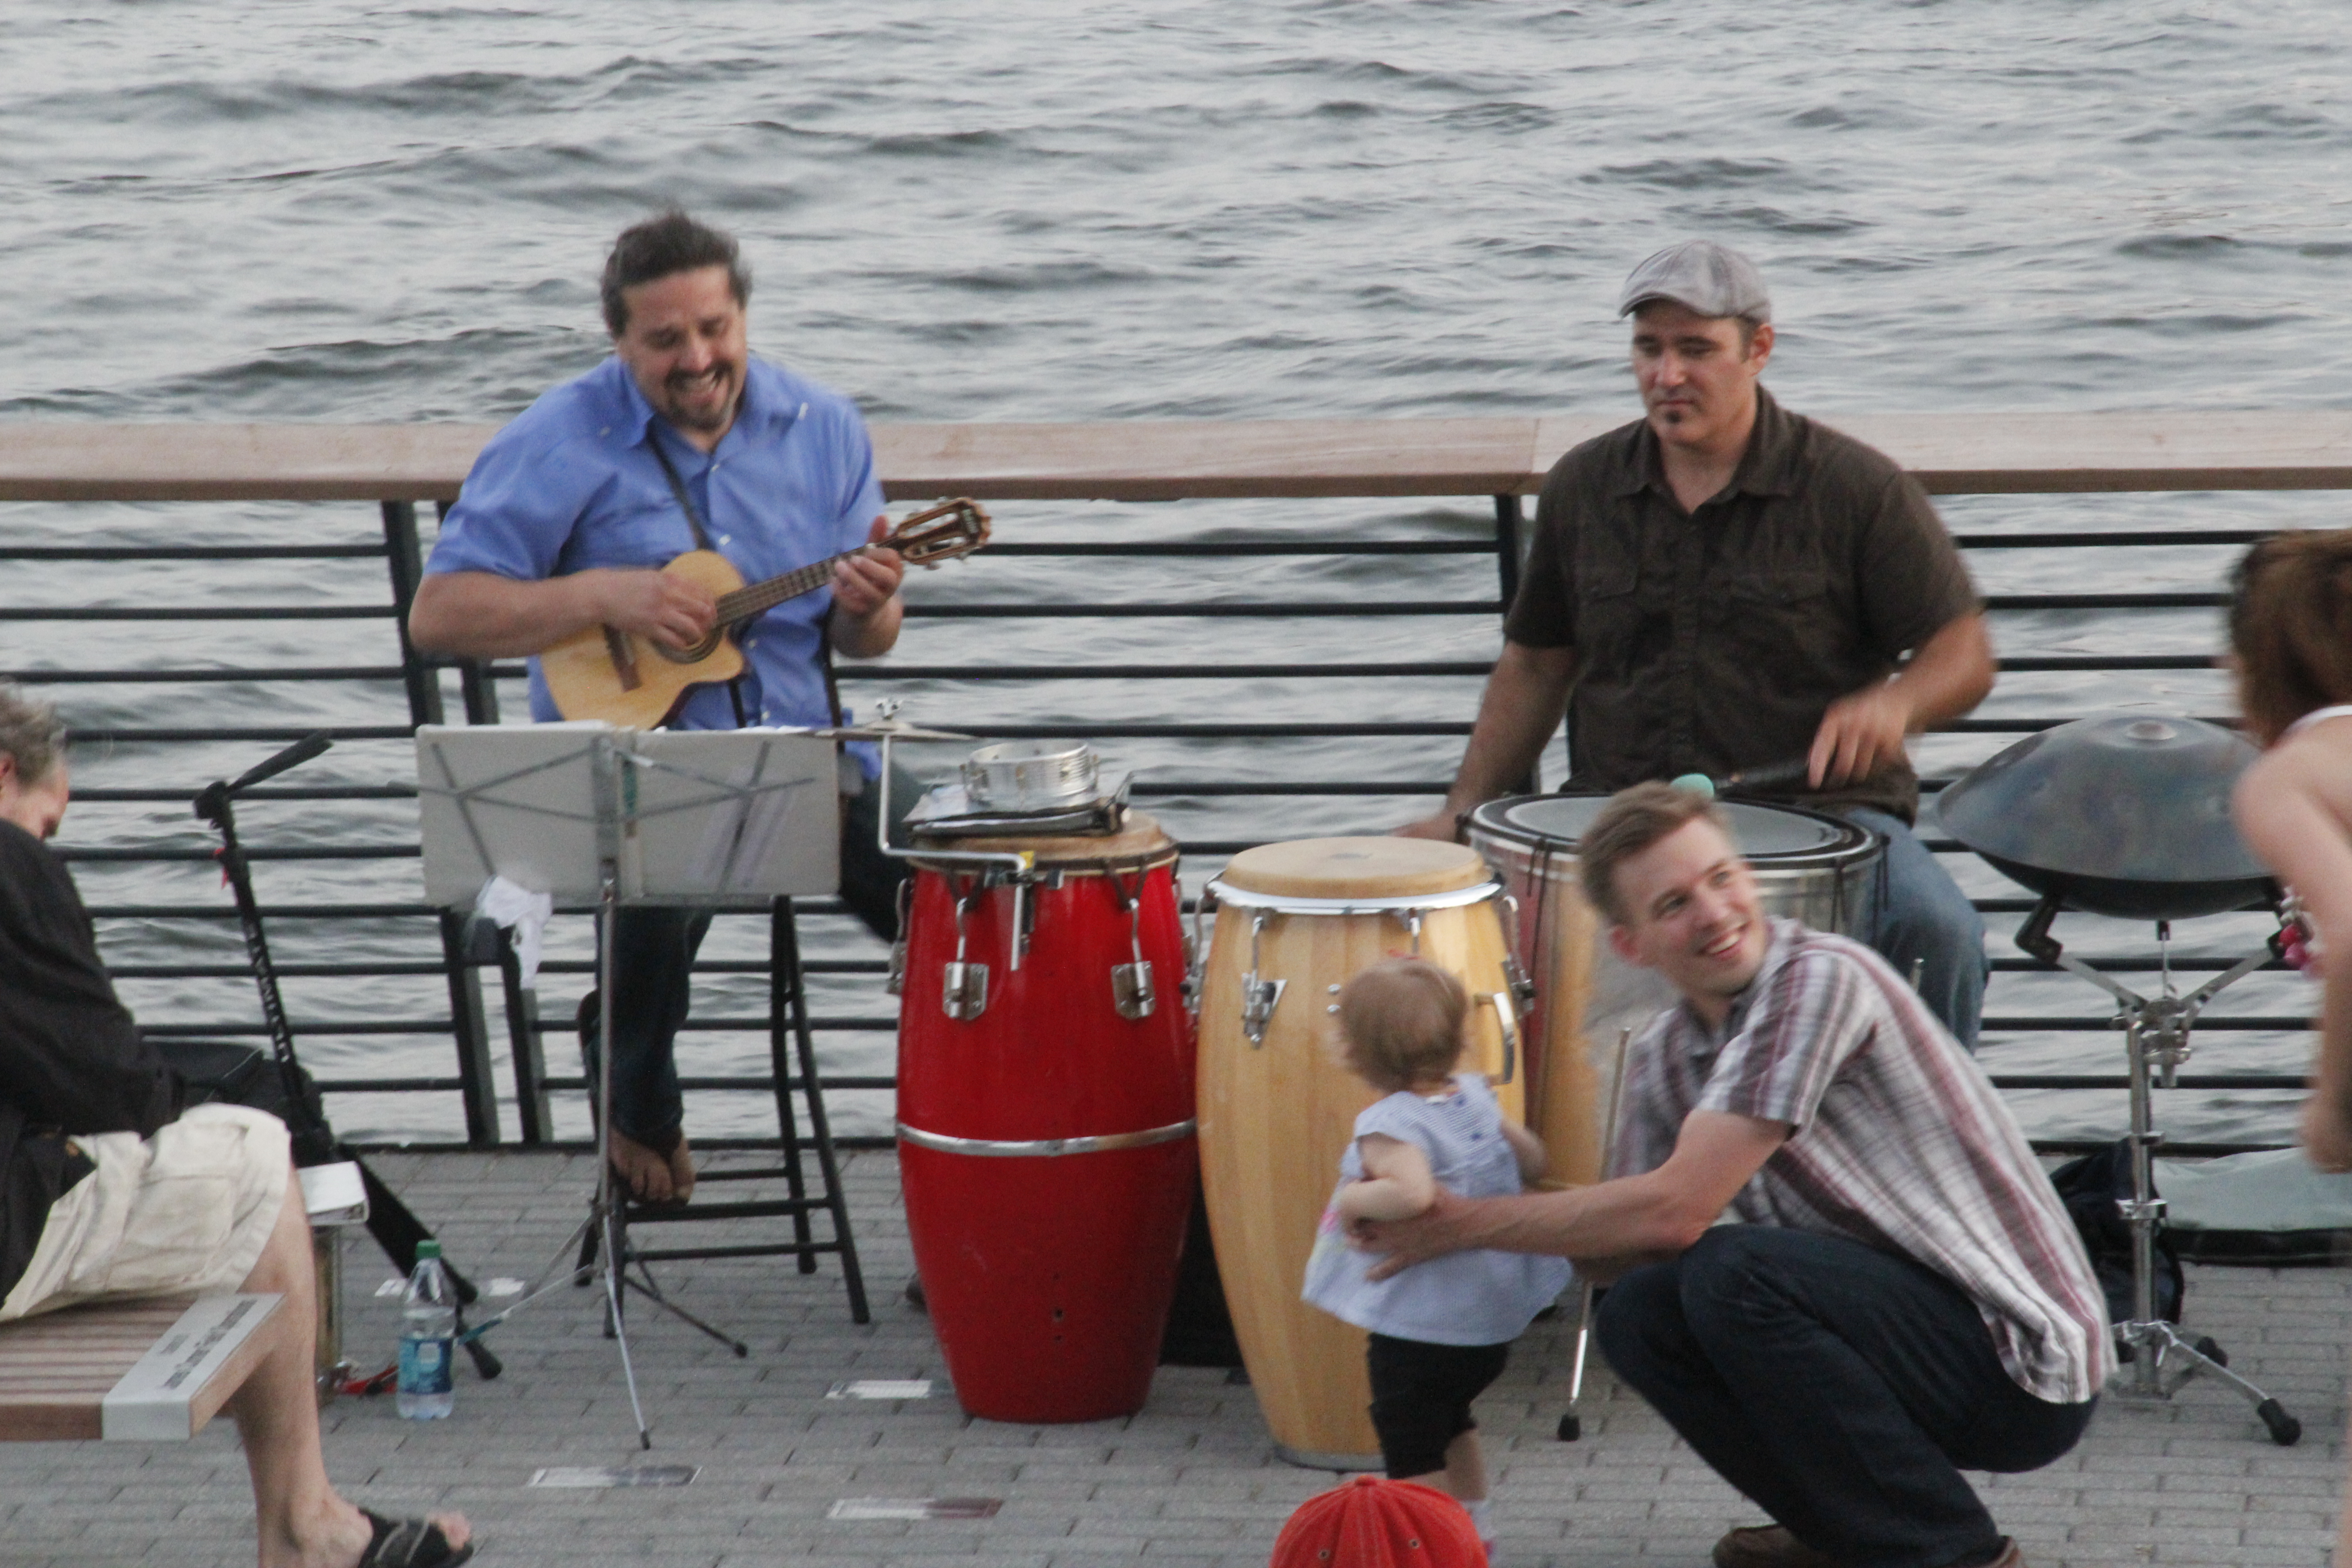 Catching up with food and tunes at First Friday on Race Street Pier